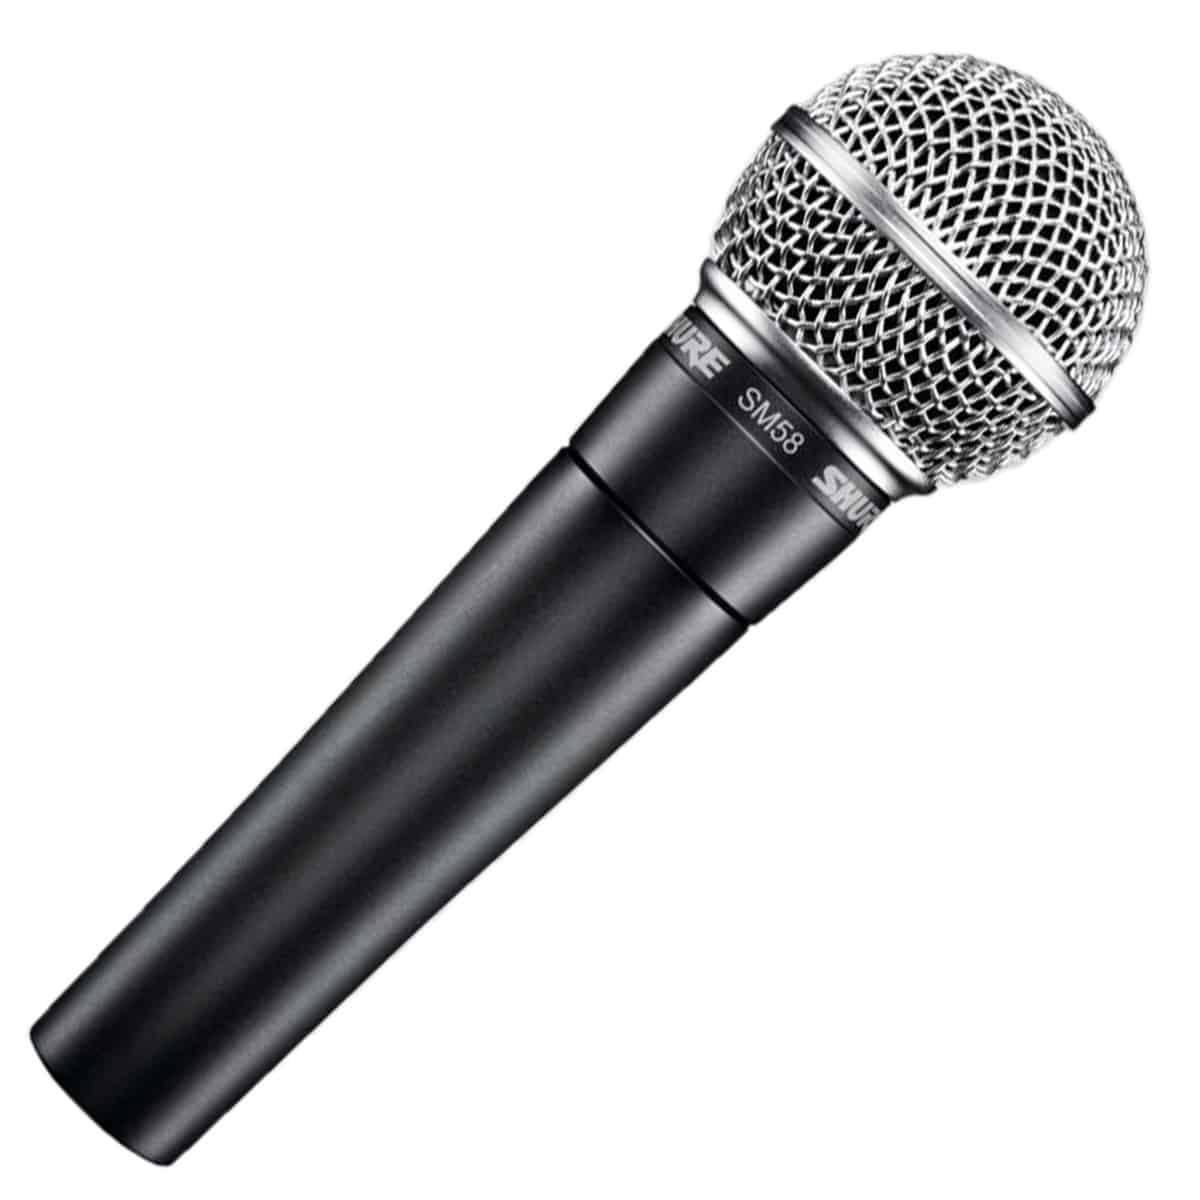 Pic-Event micro chant shure